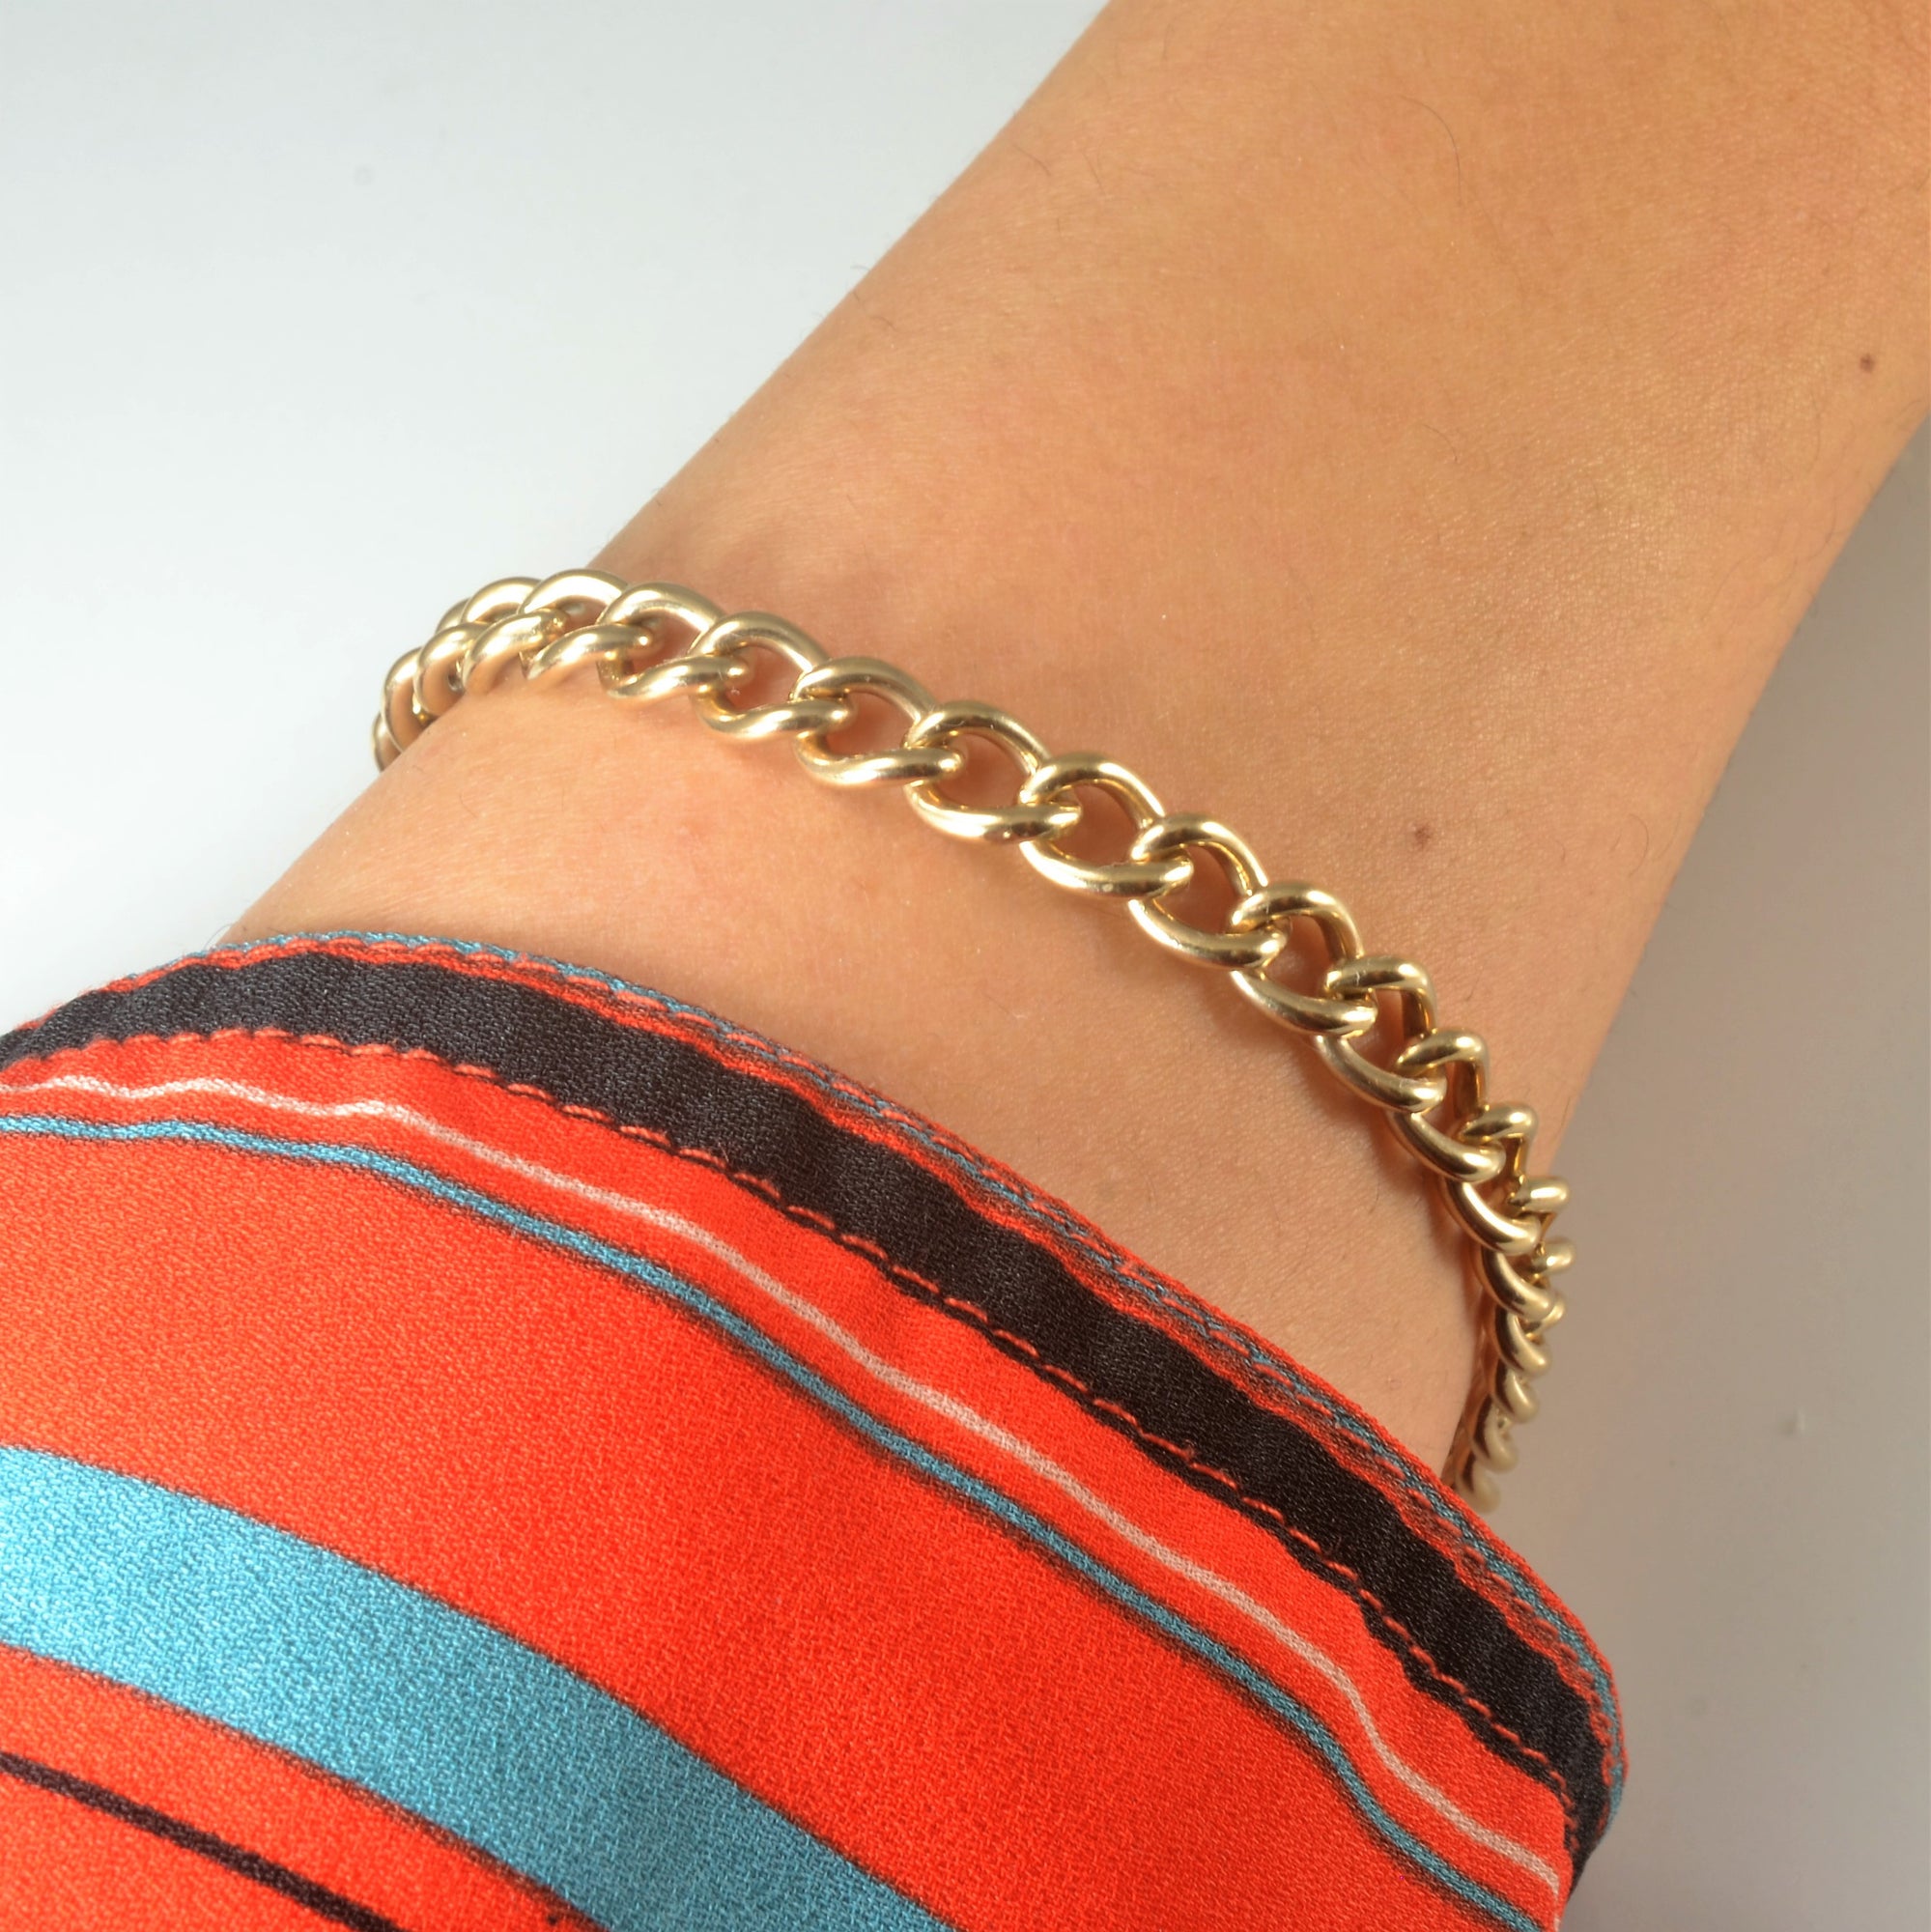 Yellow Gold Cable Chain Bracelet | 7.5